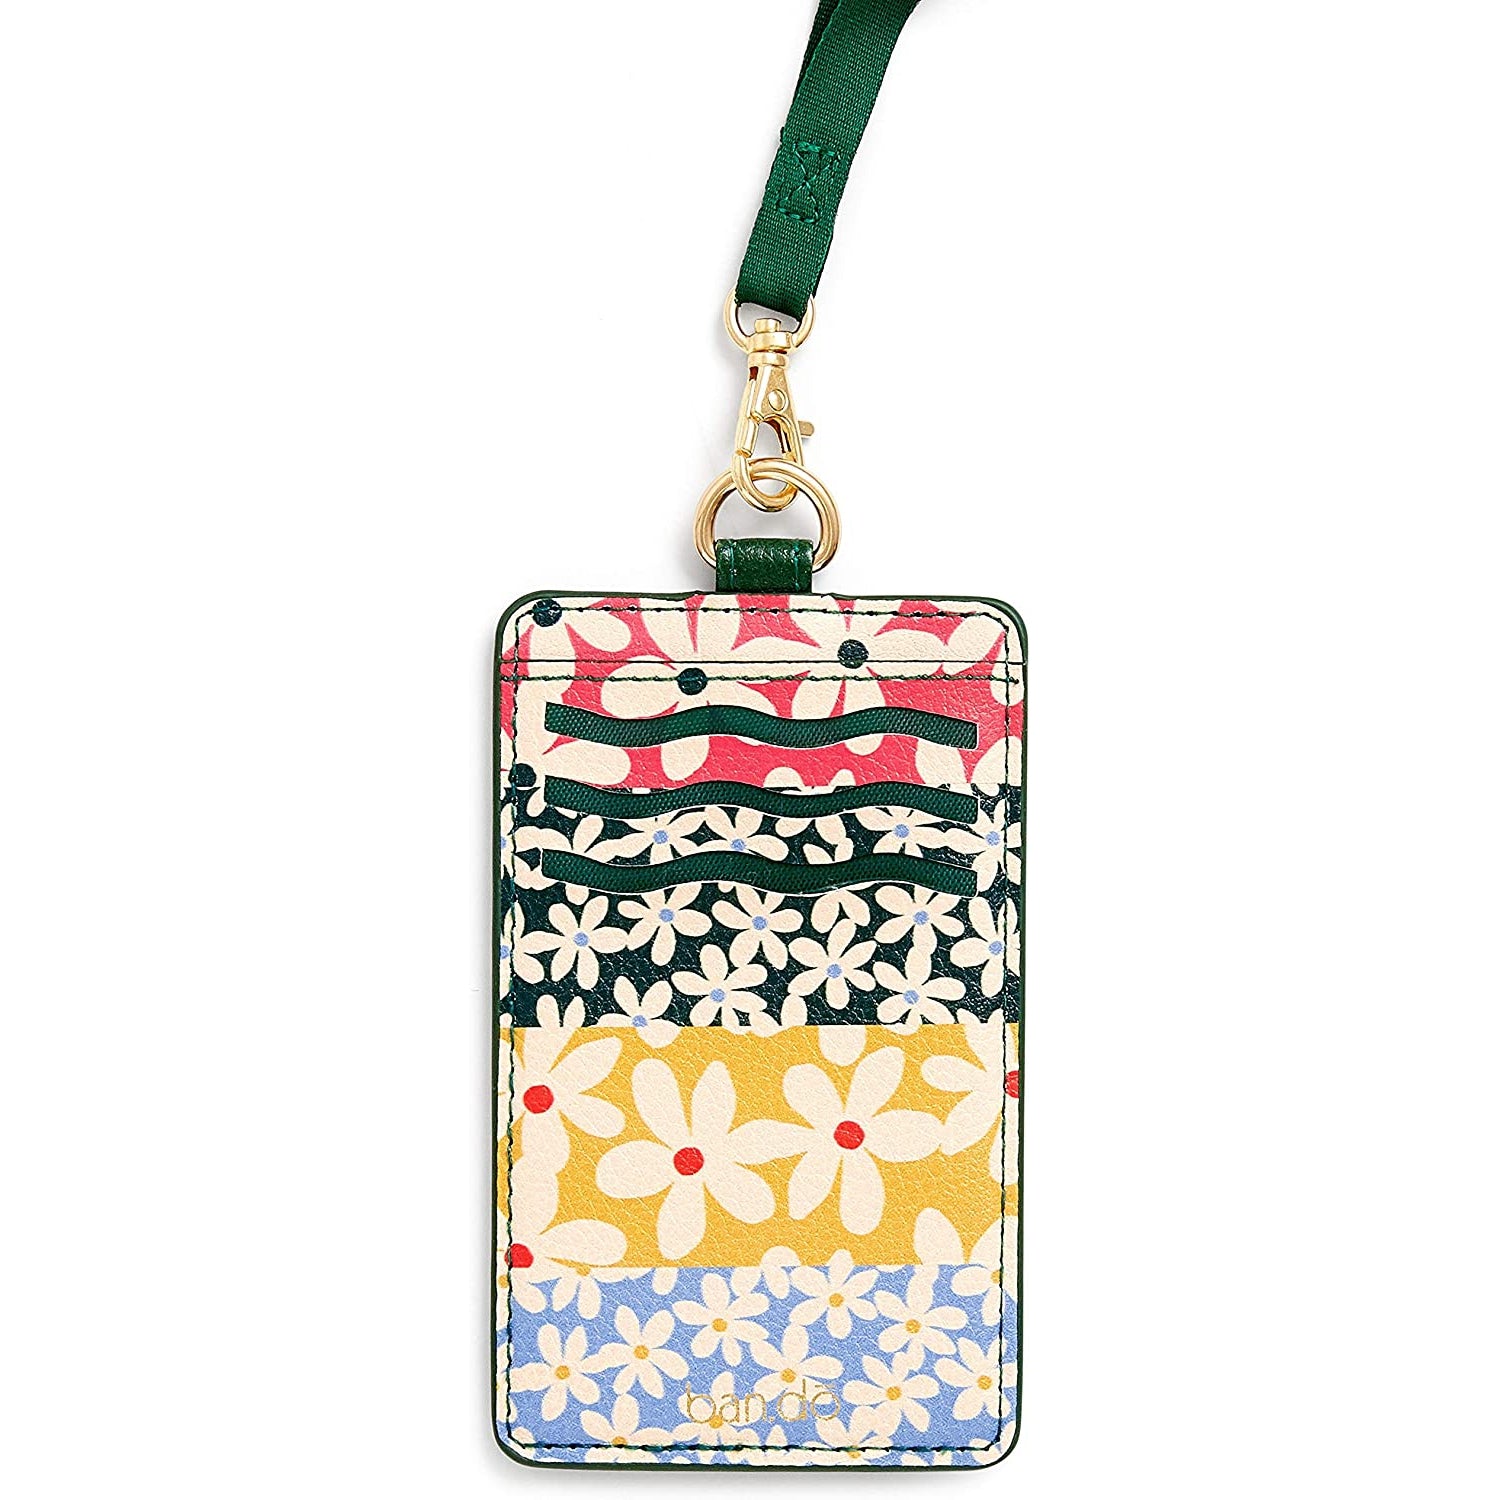 Ban.do Keep it Close Card Case With Lanyard, Daisies | Leatherette Badge Holder